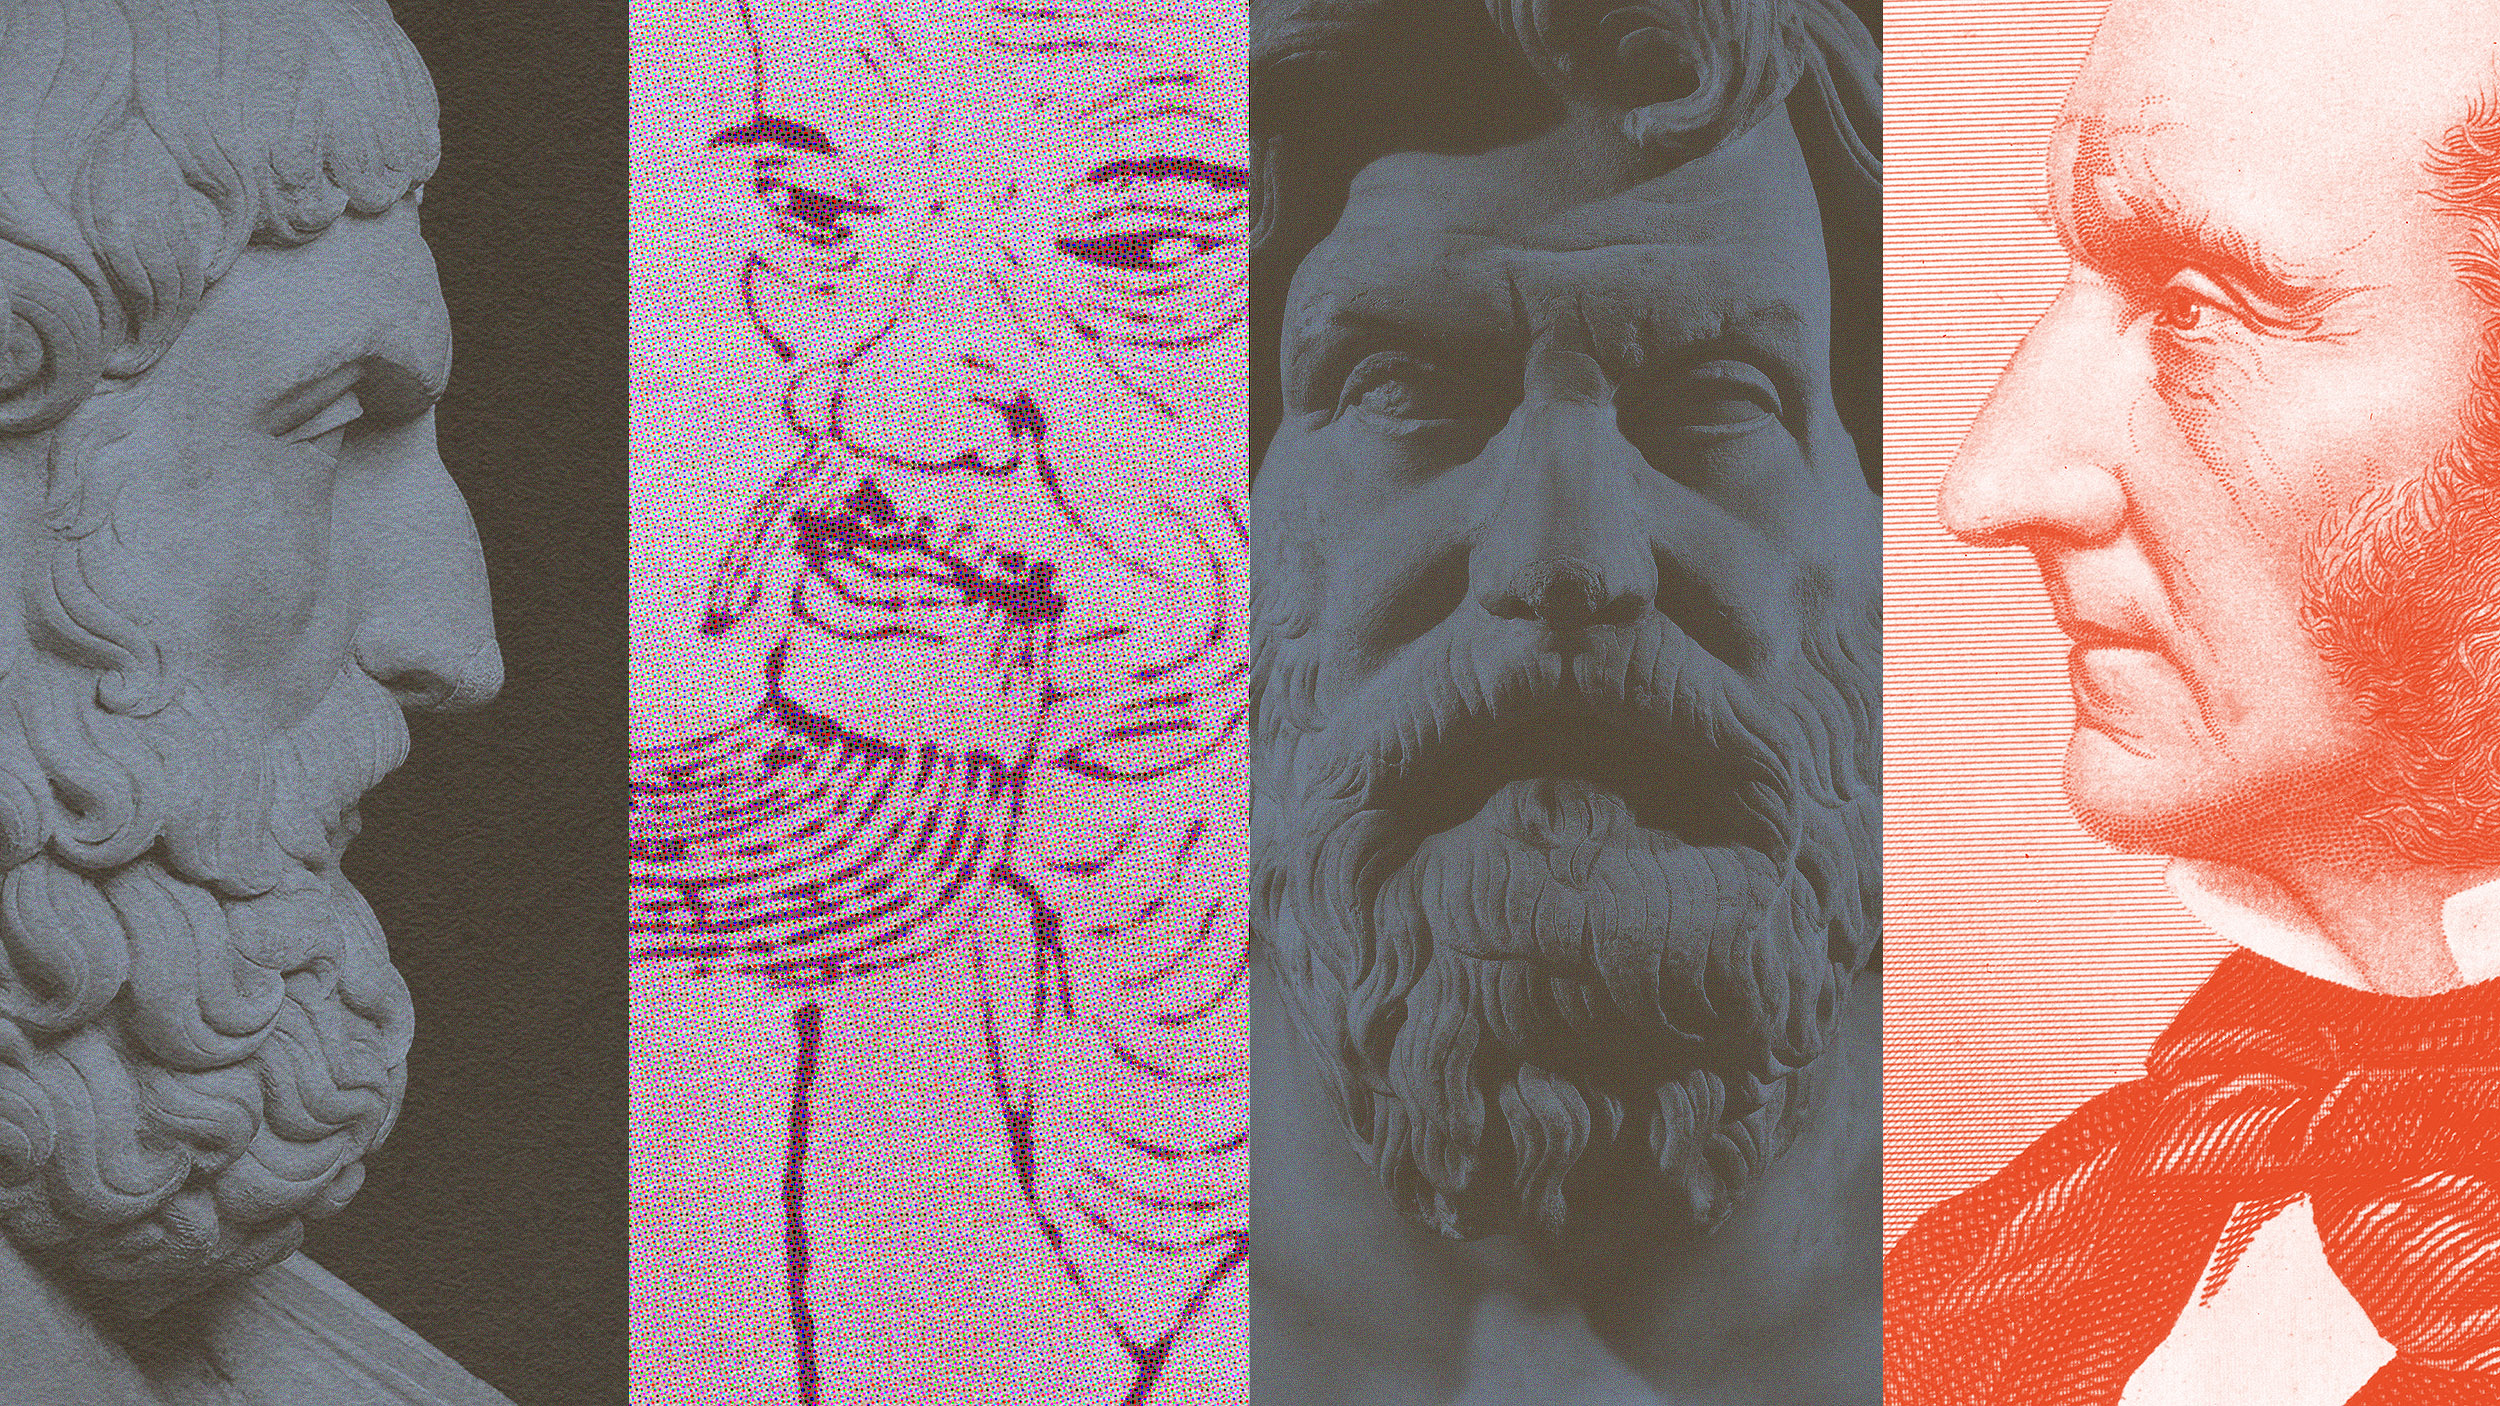 Four-panel collage of historical philosophers in various artistic styles, including a sculpture, a sketch, and two realistic portraits.